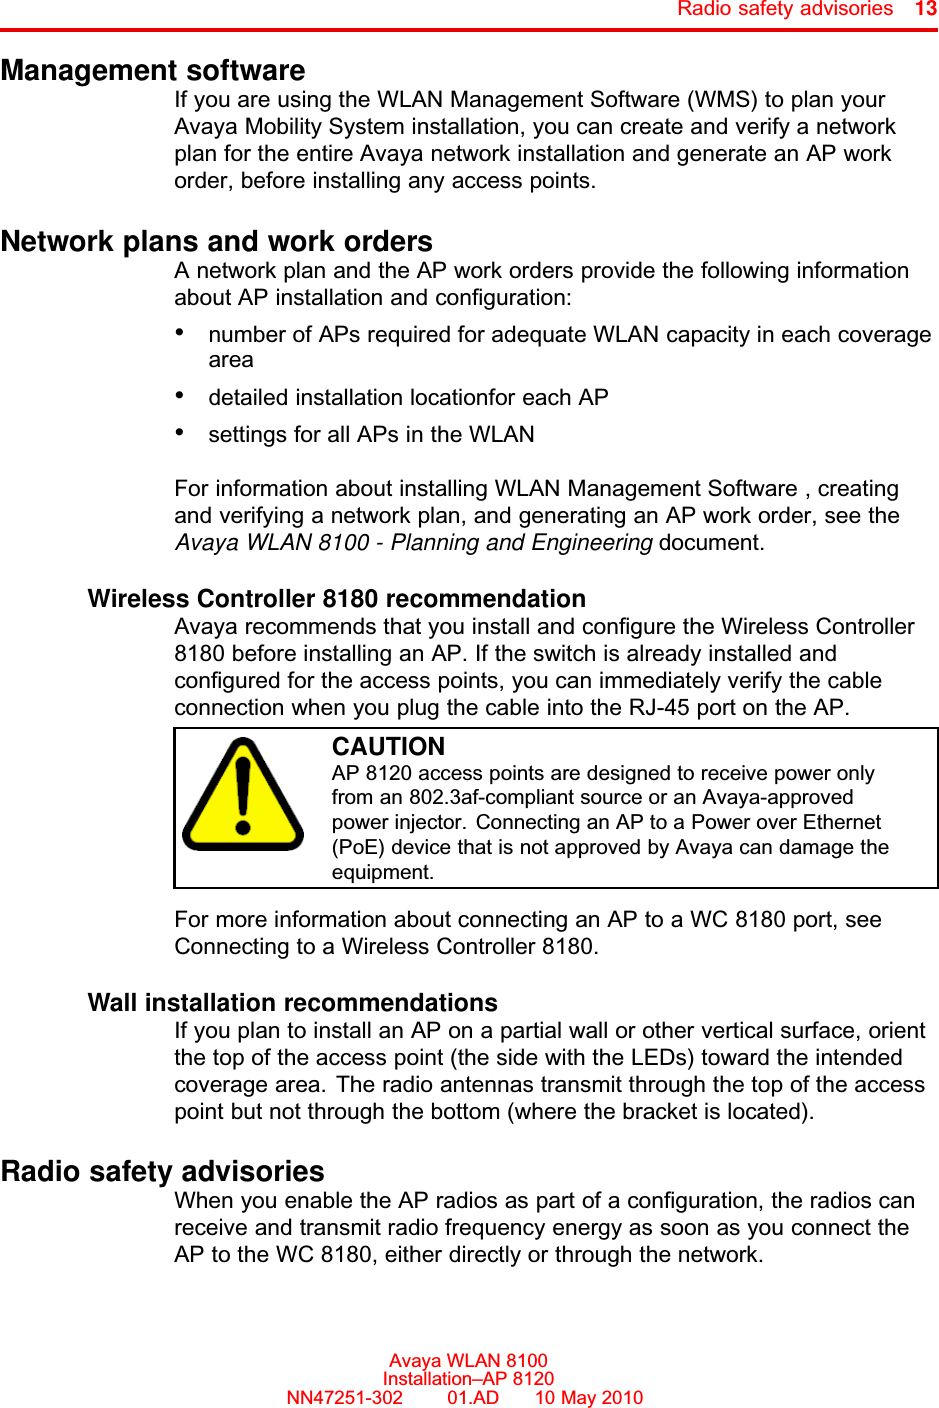 Radio safety advisories 13Management softwareIf you are using the WLAN Management Software (WMS) to plan yourAvaya Mobility System installation, you can create and verify a networkplan for the entire Avaya network installation and generate an AP workorder, before installing any access points.Network plans and work ordersA network plan and the AP work orders provide the following informationabout AP installation and configuration:•number of APs required for adequate WLAN capacity in each coveragearea•detailed installation locationfor each AP•settings for all APs in the WLANFor information about installing WLAN Management Software , creatingand verifying a network plan, and generating an AP work order, see theAvaya WLAN 8100 - Planning and Engineering document.Wireless Controller 8180 recommendationAvaya recommends that you install and configure the Wireless Controller8180 before installing an AP. If the switch is already installed andconfigured for the access points, you can immediately verify the cableconnection when you plug the cable into the RJ-45 port on the AP.CAUTIONAP 8120 access points are designed to receive power onlyfrom an 802.3af-compliant source or an Avaya-approvedpower injector. Connecting an AP to a Power over Ethernet(PoE) device that is not approved by Avaya can damage theequipment.For more information about connecting an AP to a WC 8180 port, seeConnecting to a Wireless Controller 8180.Wall installation recommendationsIf you plan to install an AP on a partial wall or other vertical surface, orientthe top of the access point (the side with the LEDs) toward the intendedcoverage area. The radio antennas transmit through the top of the accesspoint but not through the bottom (where the bracket is located).Radio safety advisoriesWhen you enable the AP radios as part of a configuration, the radios canreceive and transmit radio frequency energy as soon as you connect theAP to the WC 8180, either directly or through the network.Avaya WLAN 8100Installation–AP 8120NN47251-302      01.AD      10 May 2010.